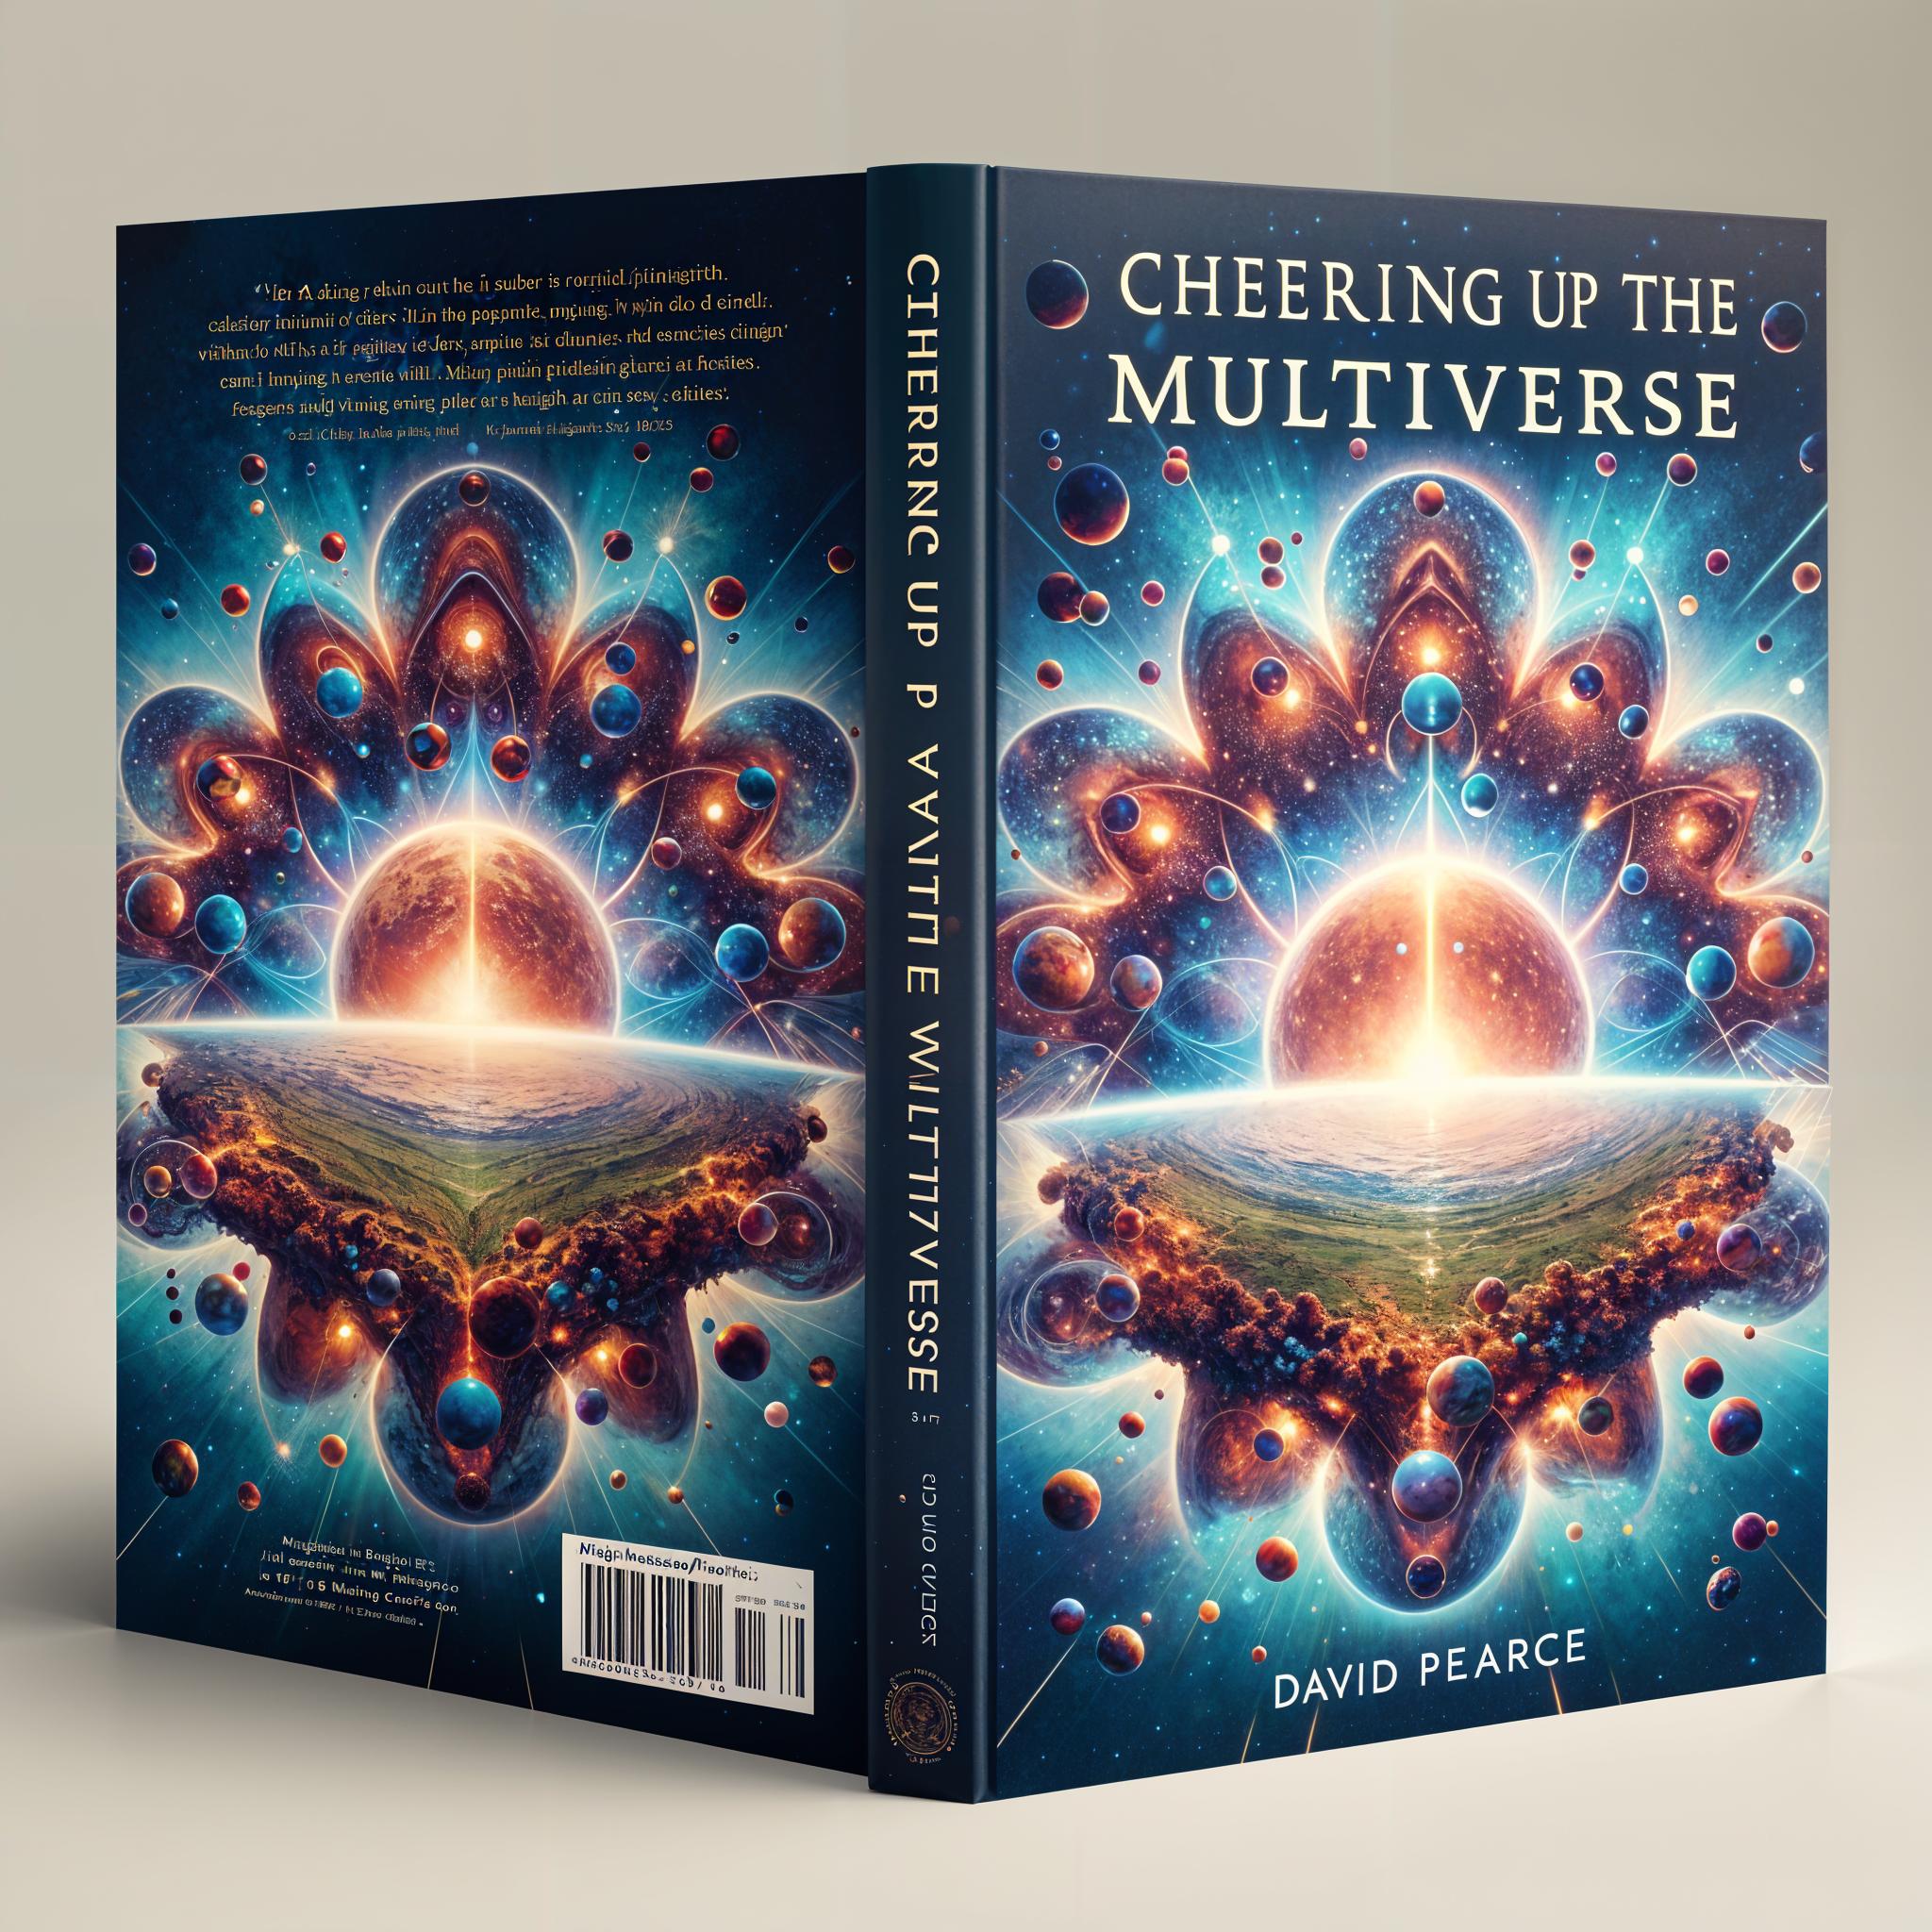 Cheering Up the Multiverse by David Pearce